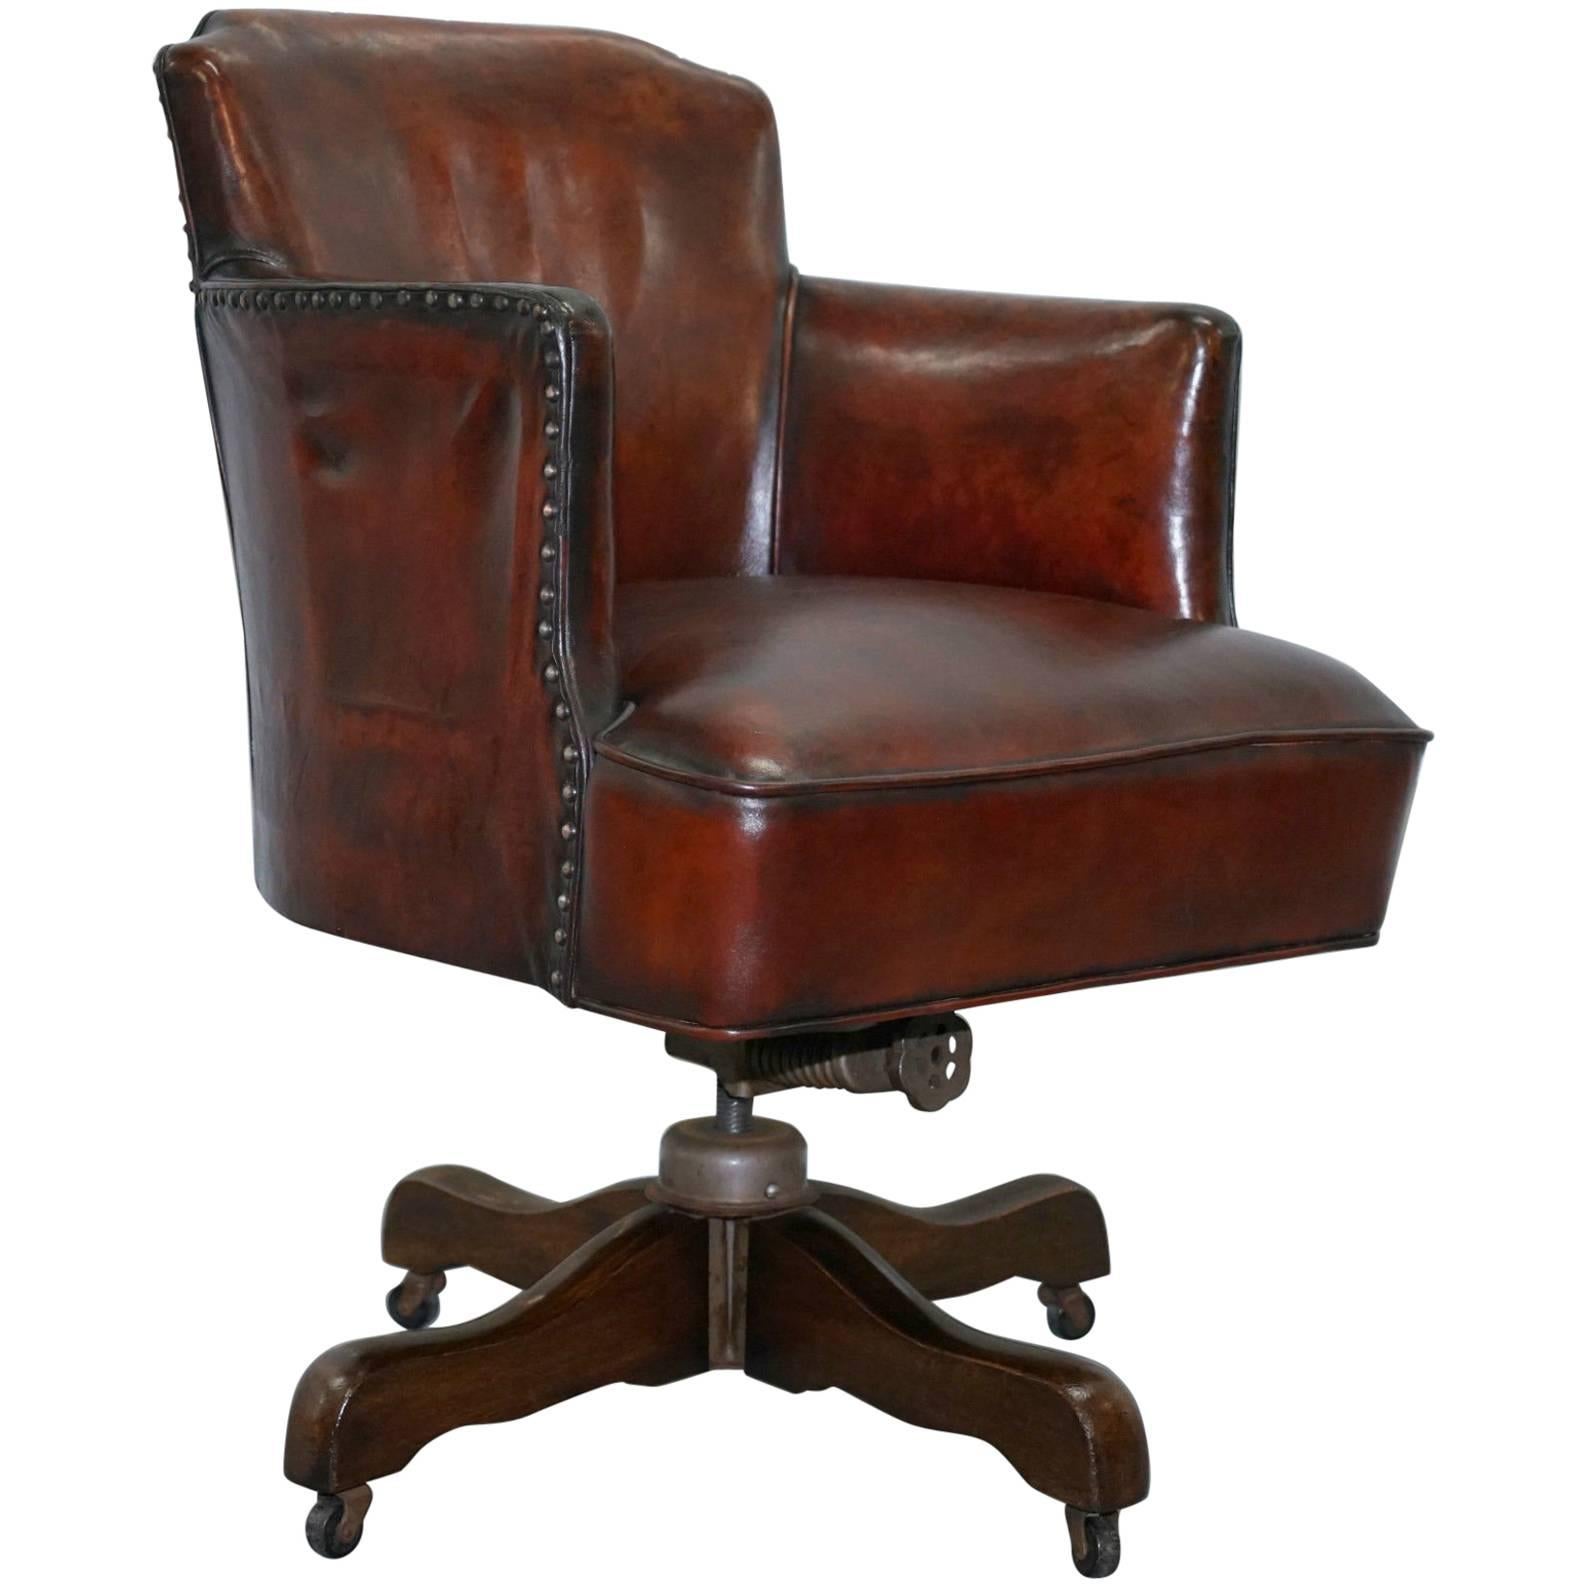 Fully Restored 1920s Hillcrest Antique Whisky Brown Leather Captains Chair